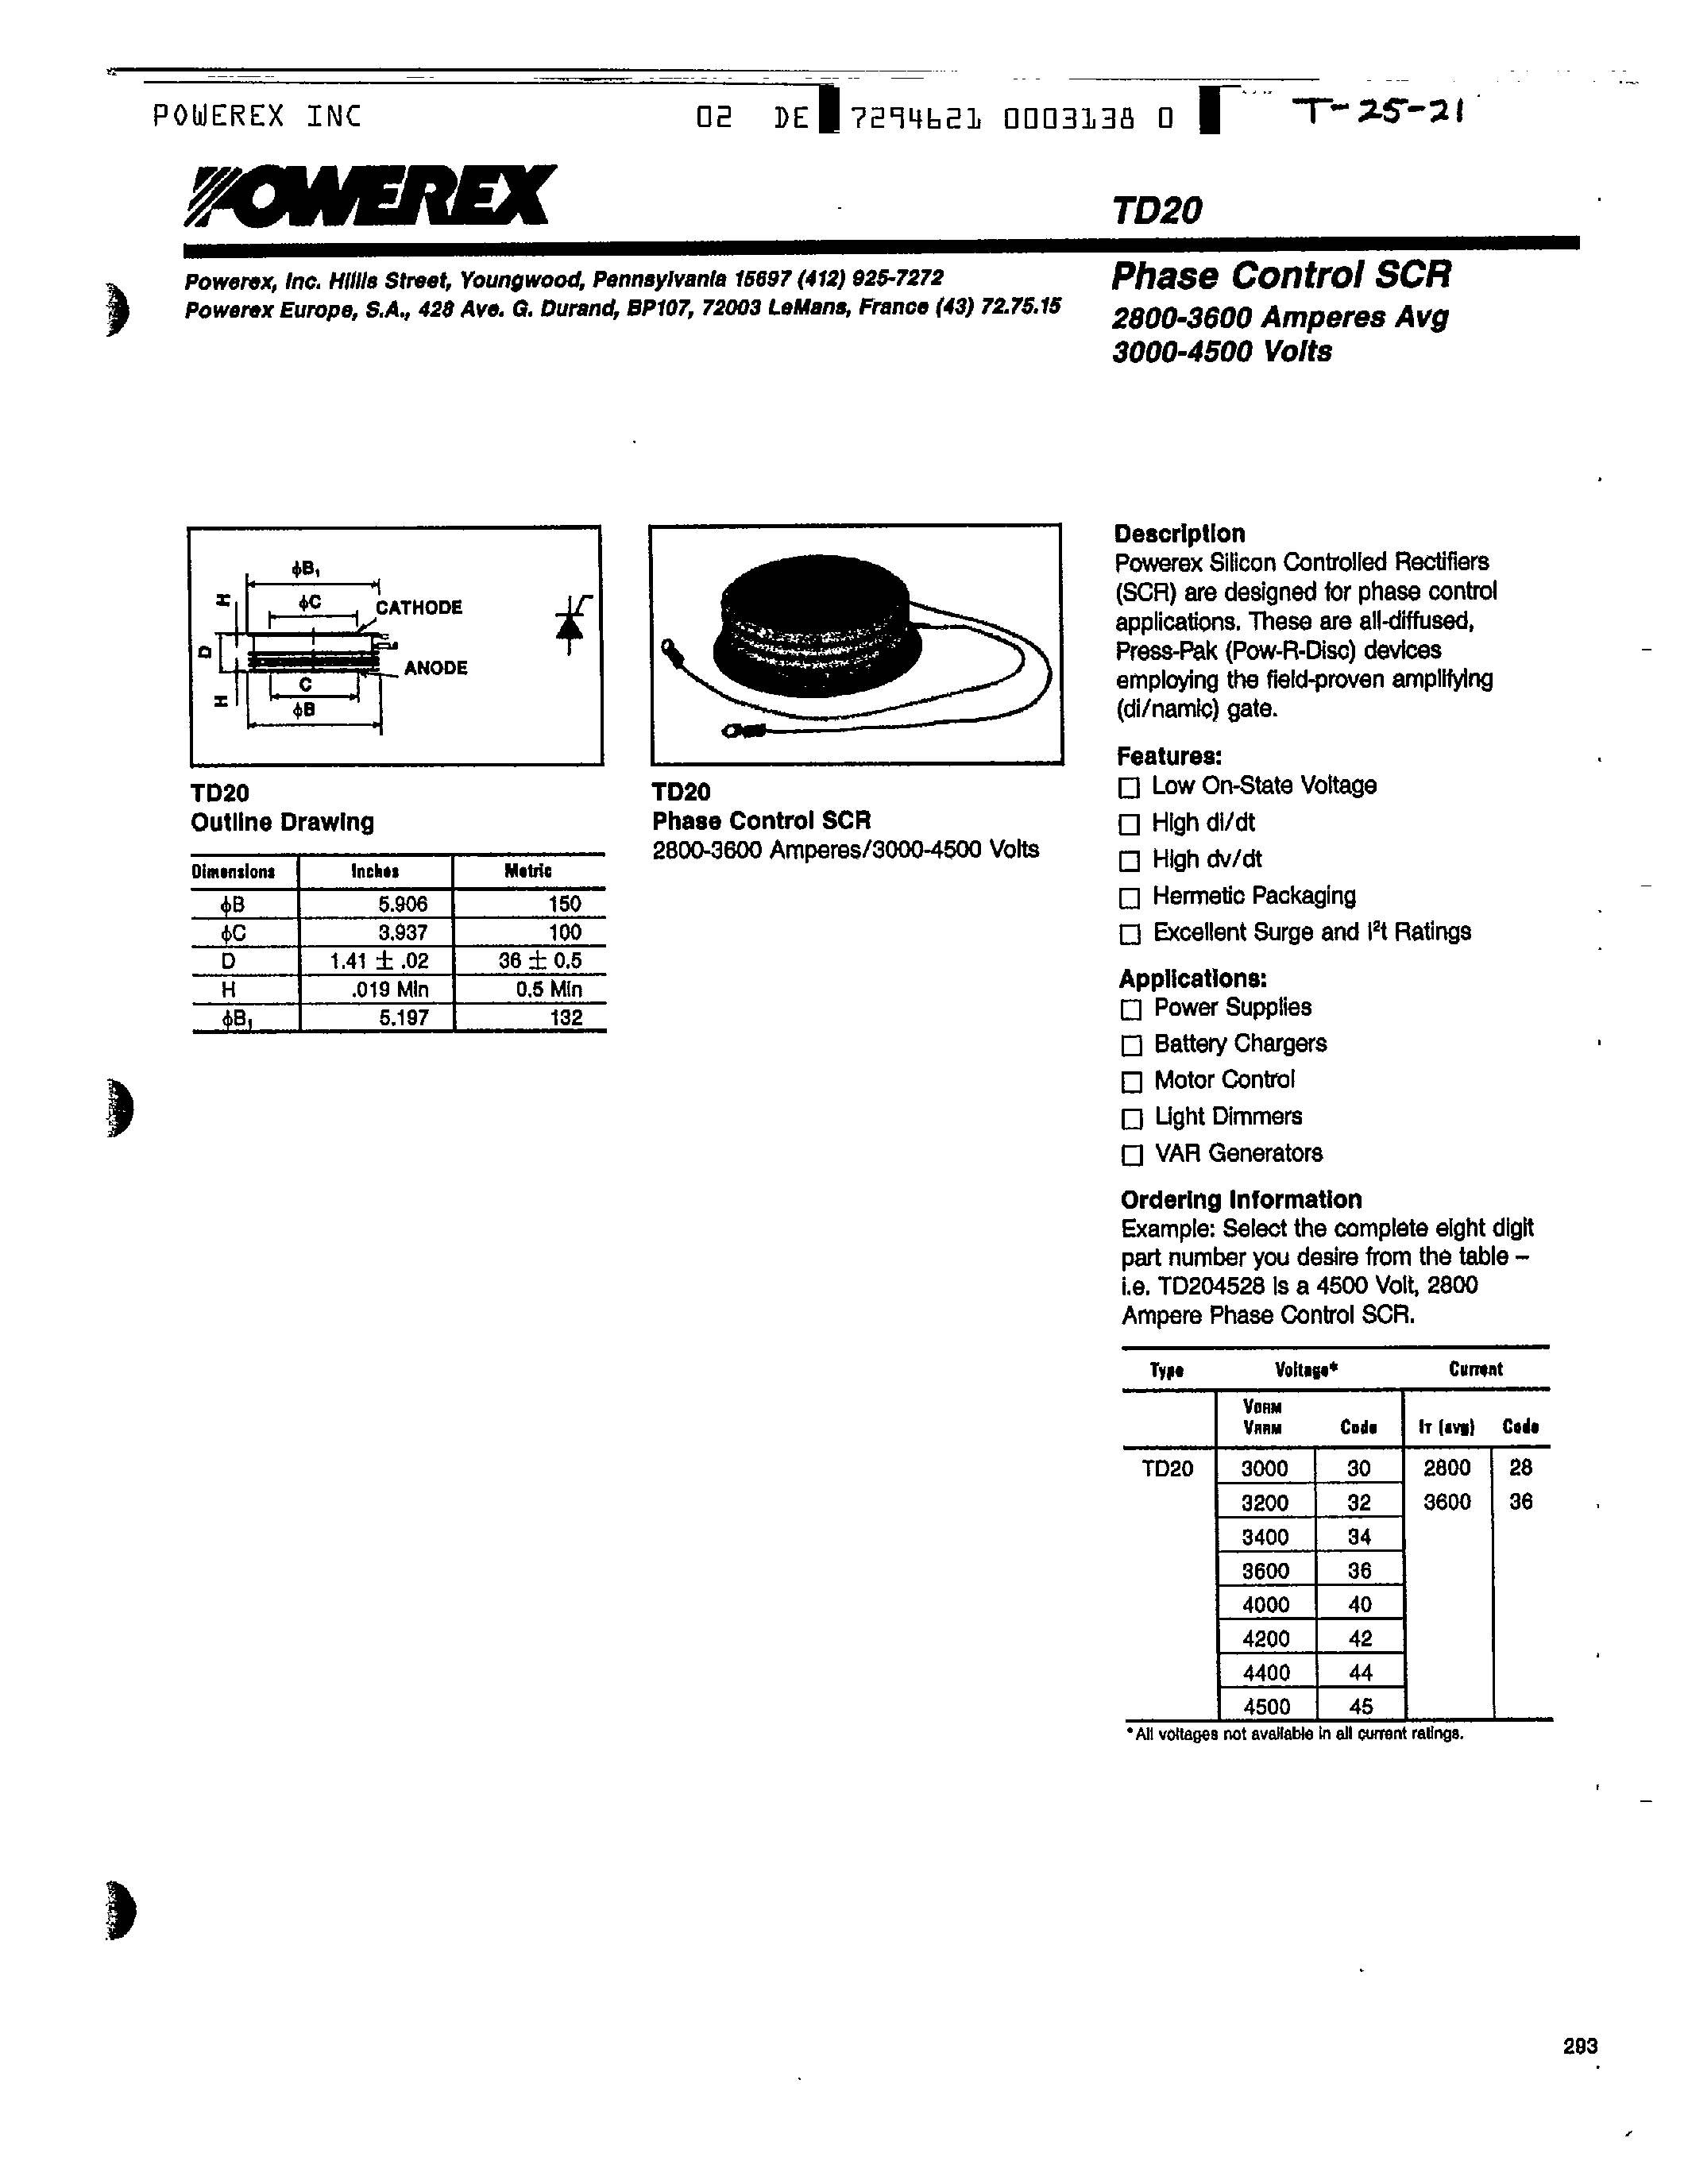 Datasheet TD203036 - Phase Control SCR (2800-3600 Amperes Avg 3000-4500 Volts) page 1